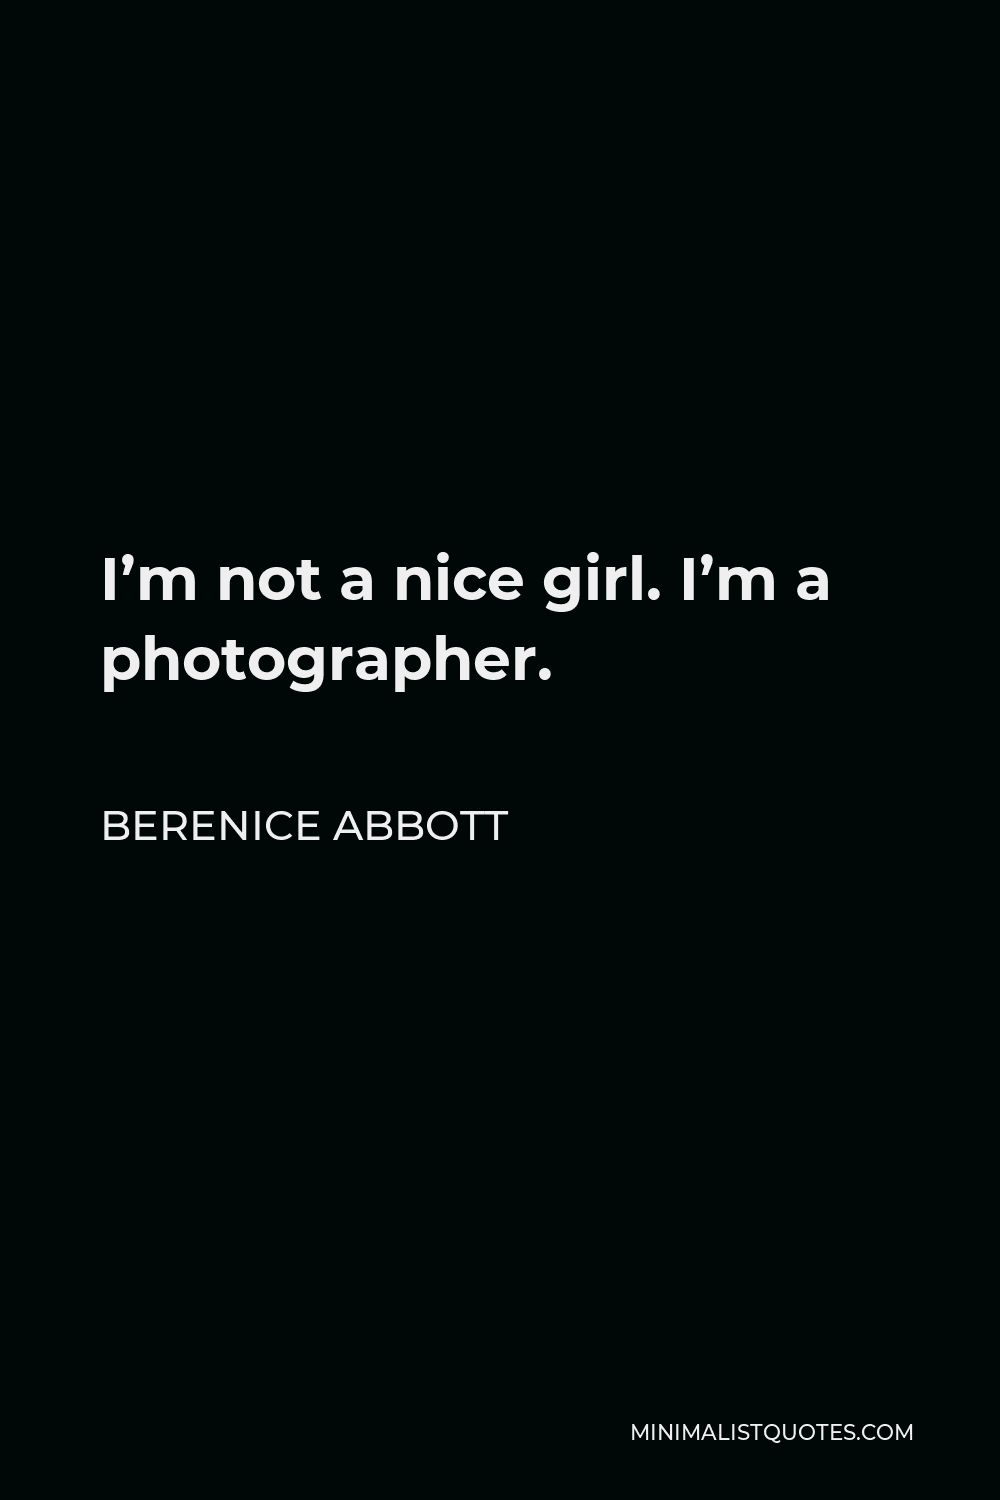 Berenice Abbott Quote - I’m not a nice girl. I’m a photographer.